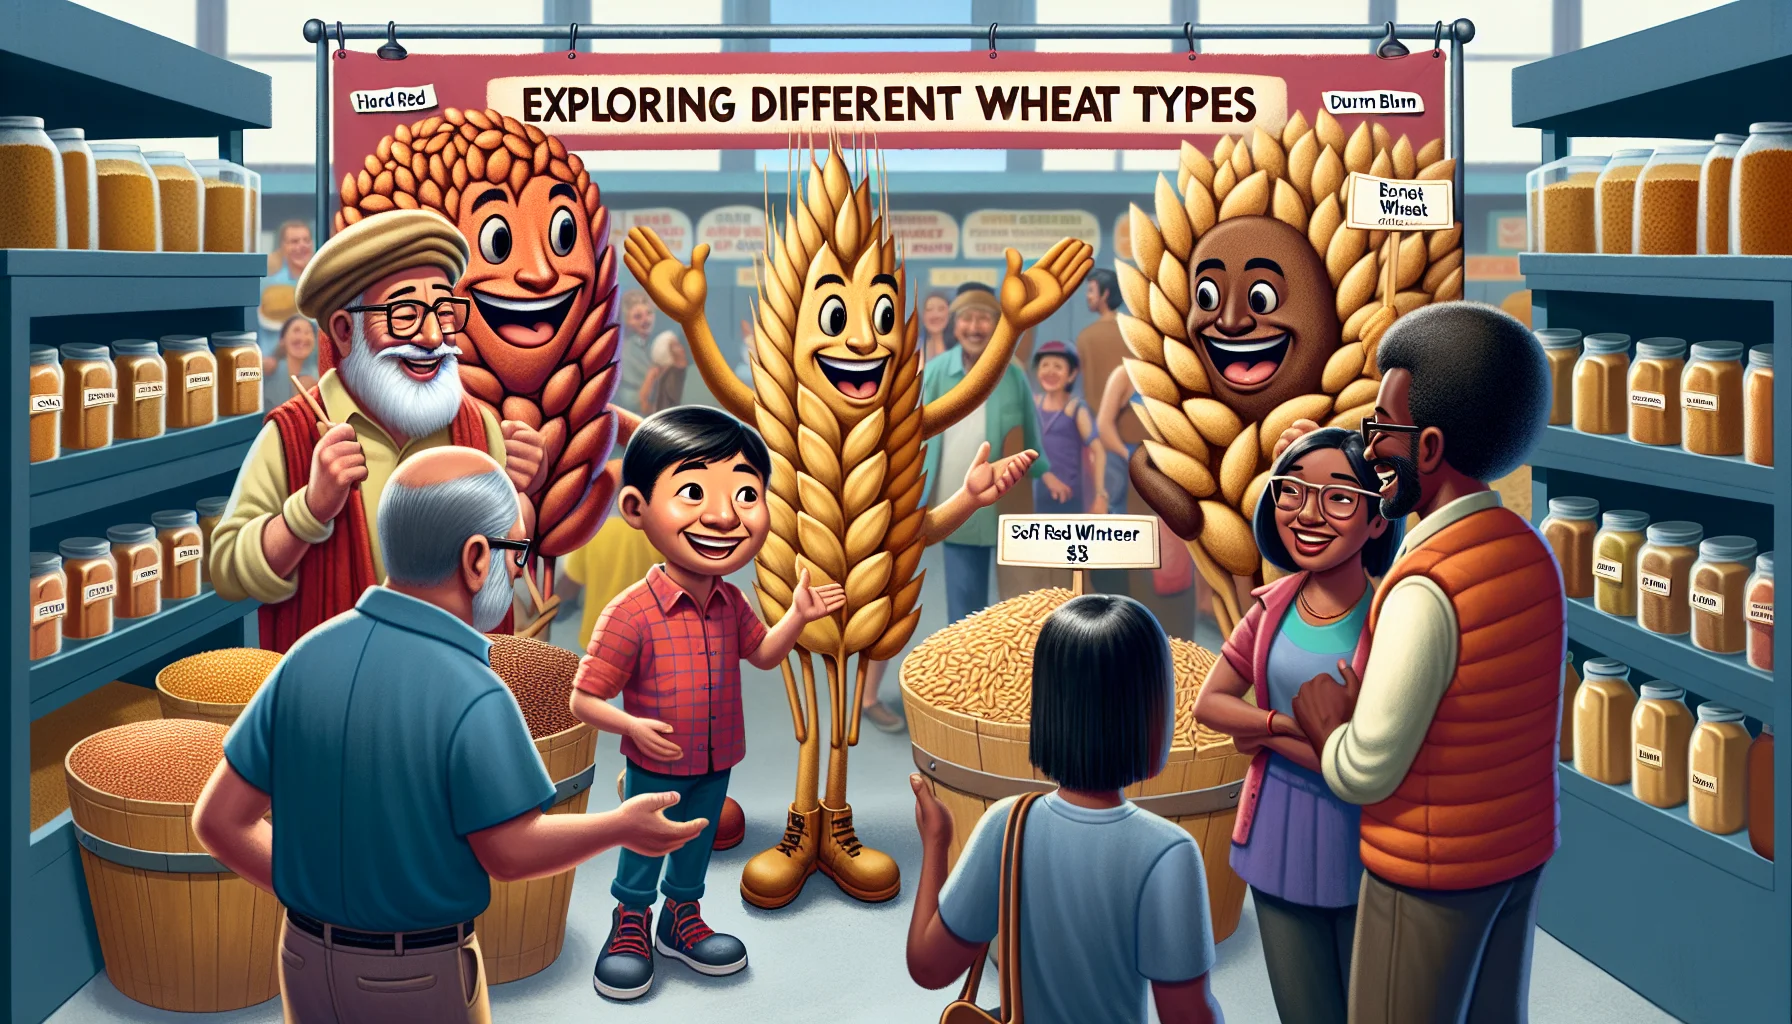 Imagine a lively and playful farmers market scene showcasing 'Exploring Different Wheat Types'. See a variety of wheat types - Hard Red Spring Wheat, Soft Red Winter Wheat, Durum Wheat - all personified in a realistic yet humorous scenario. The wheat characters are joyfully interacting with a diverse crowd of shoppers which consists of an Asian male teenager, a young Hispanic female and an elderly Black couple, enticing them to try the wheat products. Different wheat based products are displayed with price tags showing surprisingly low costs. The atmosphere is vibrant, encouraging healthy eating for less money.